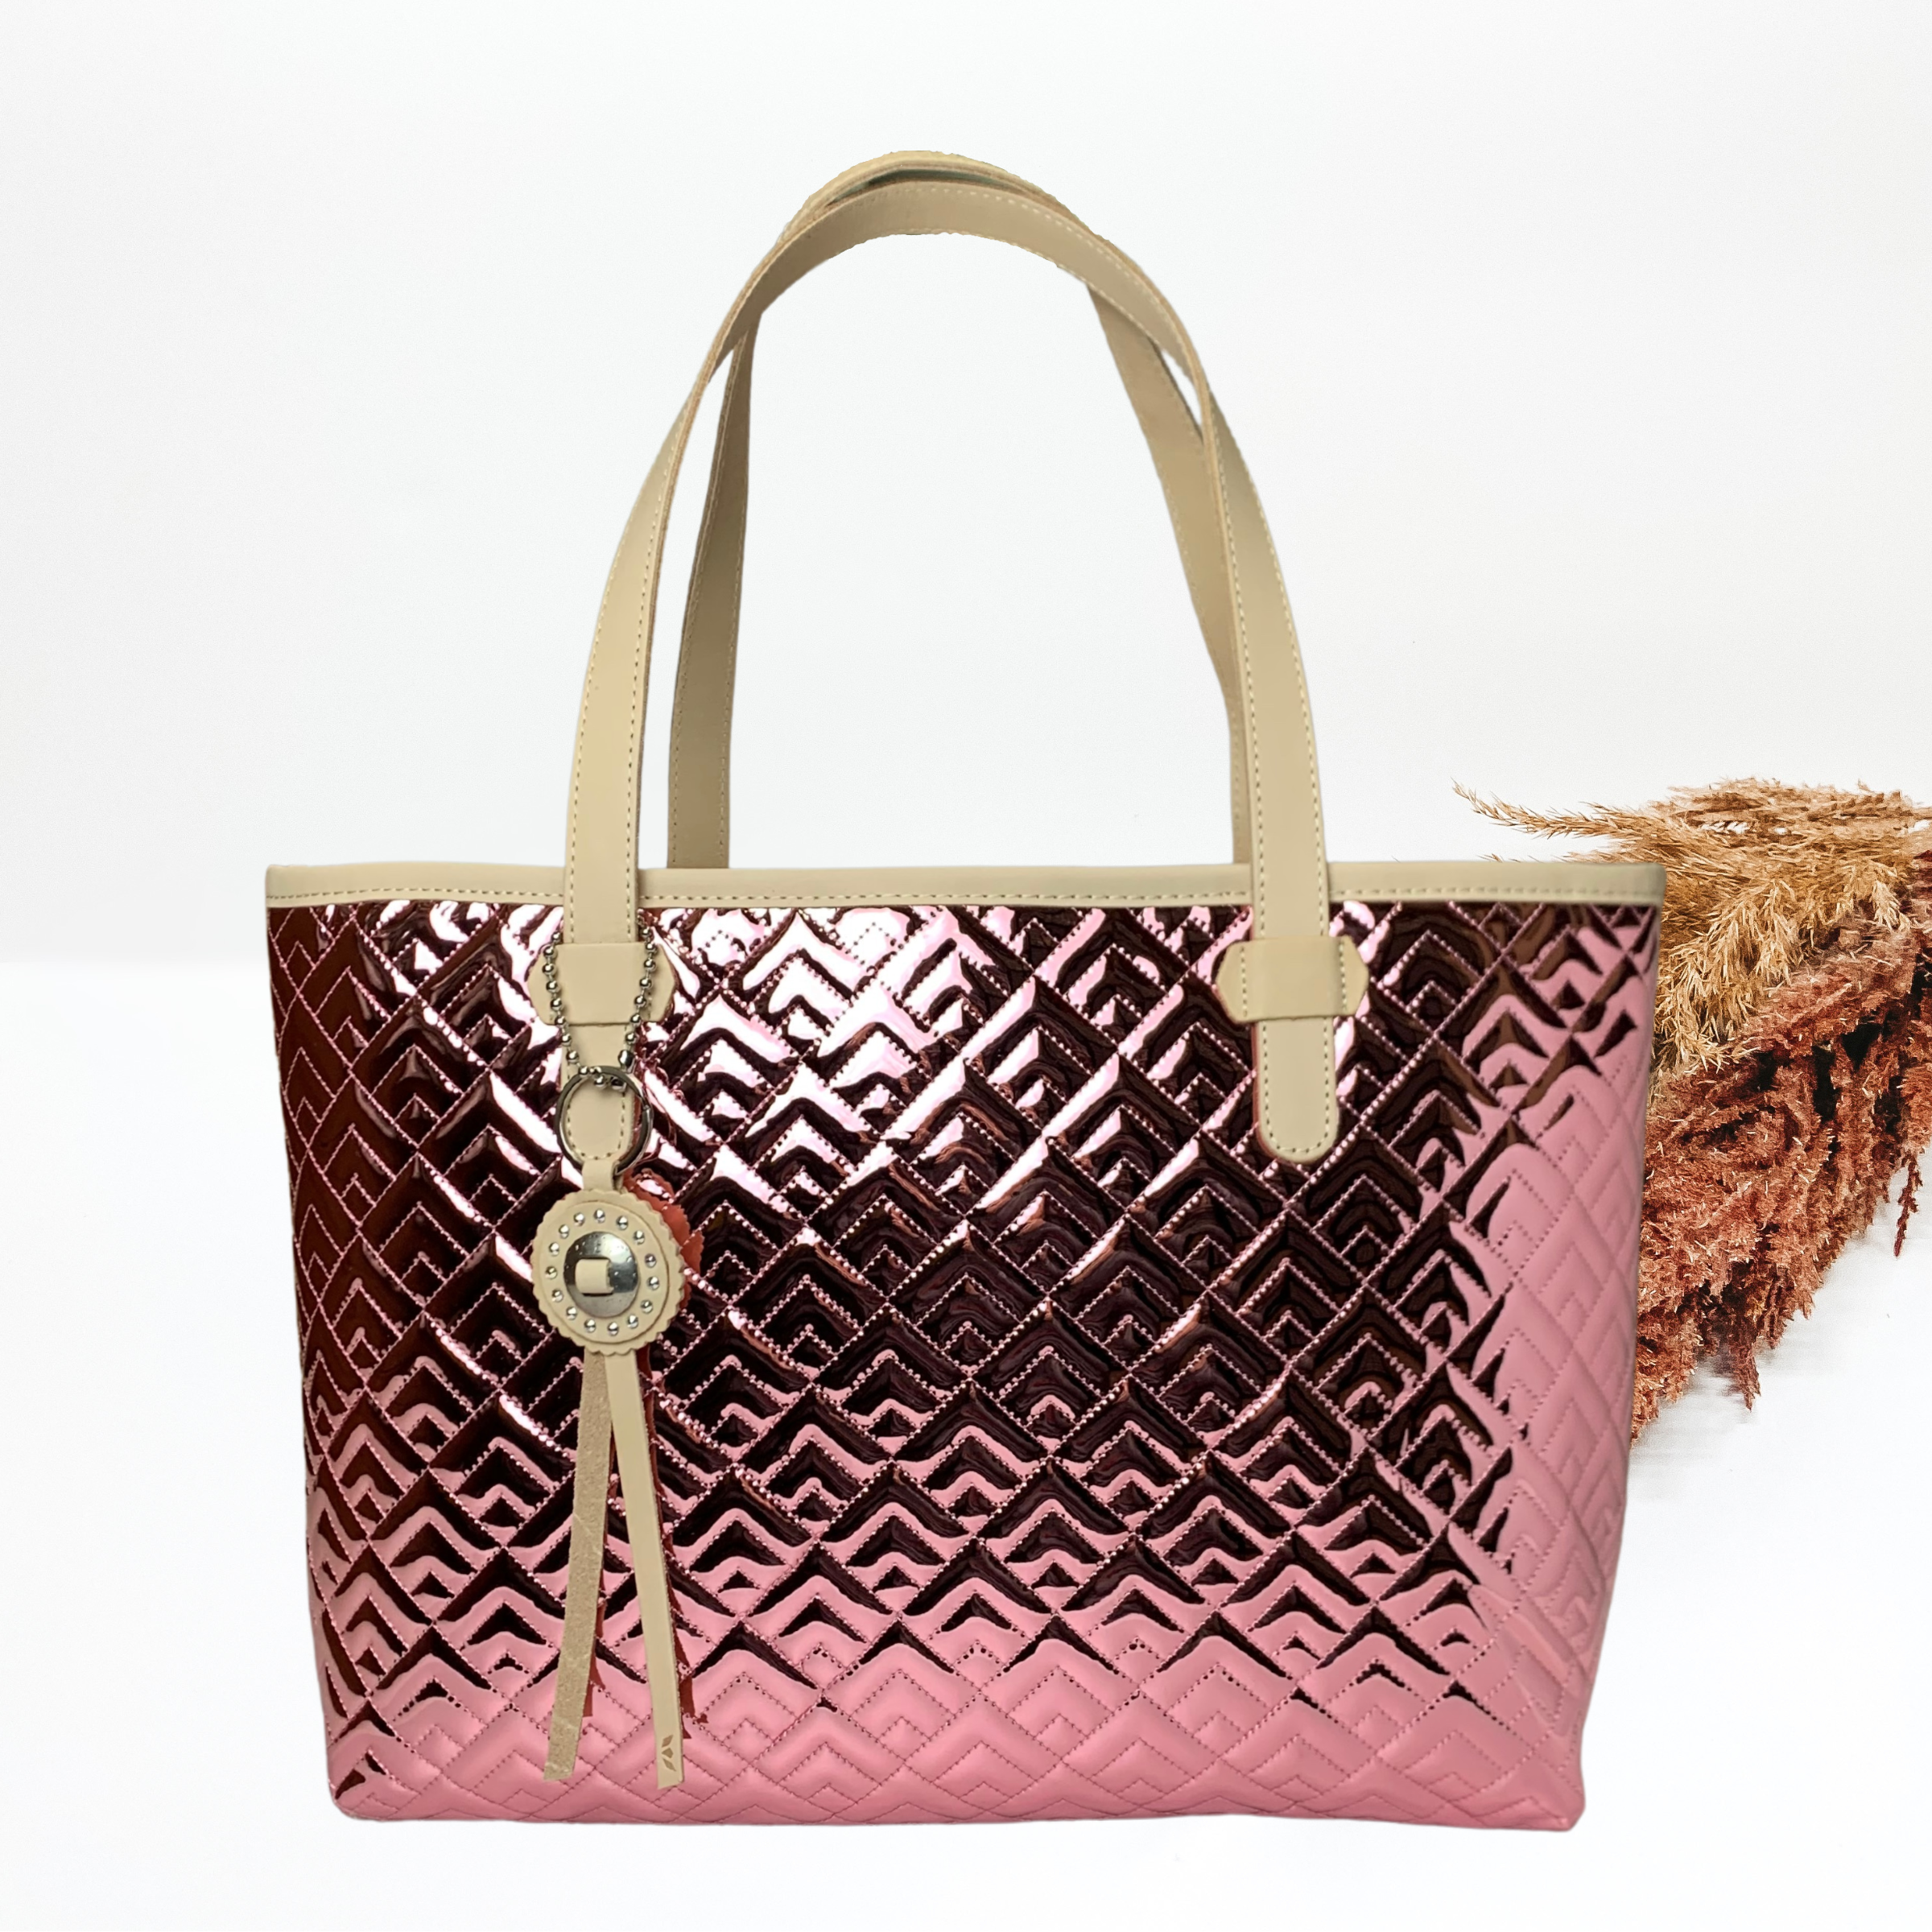 Pink metalli tote bag with a stitched pattern. This bag has light tan handles, a light tan tassel, and is a rectangle shape. This tote is pictured in front of pompous grass on a white background.